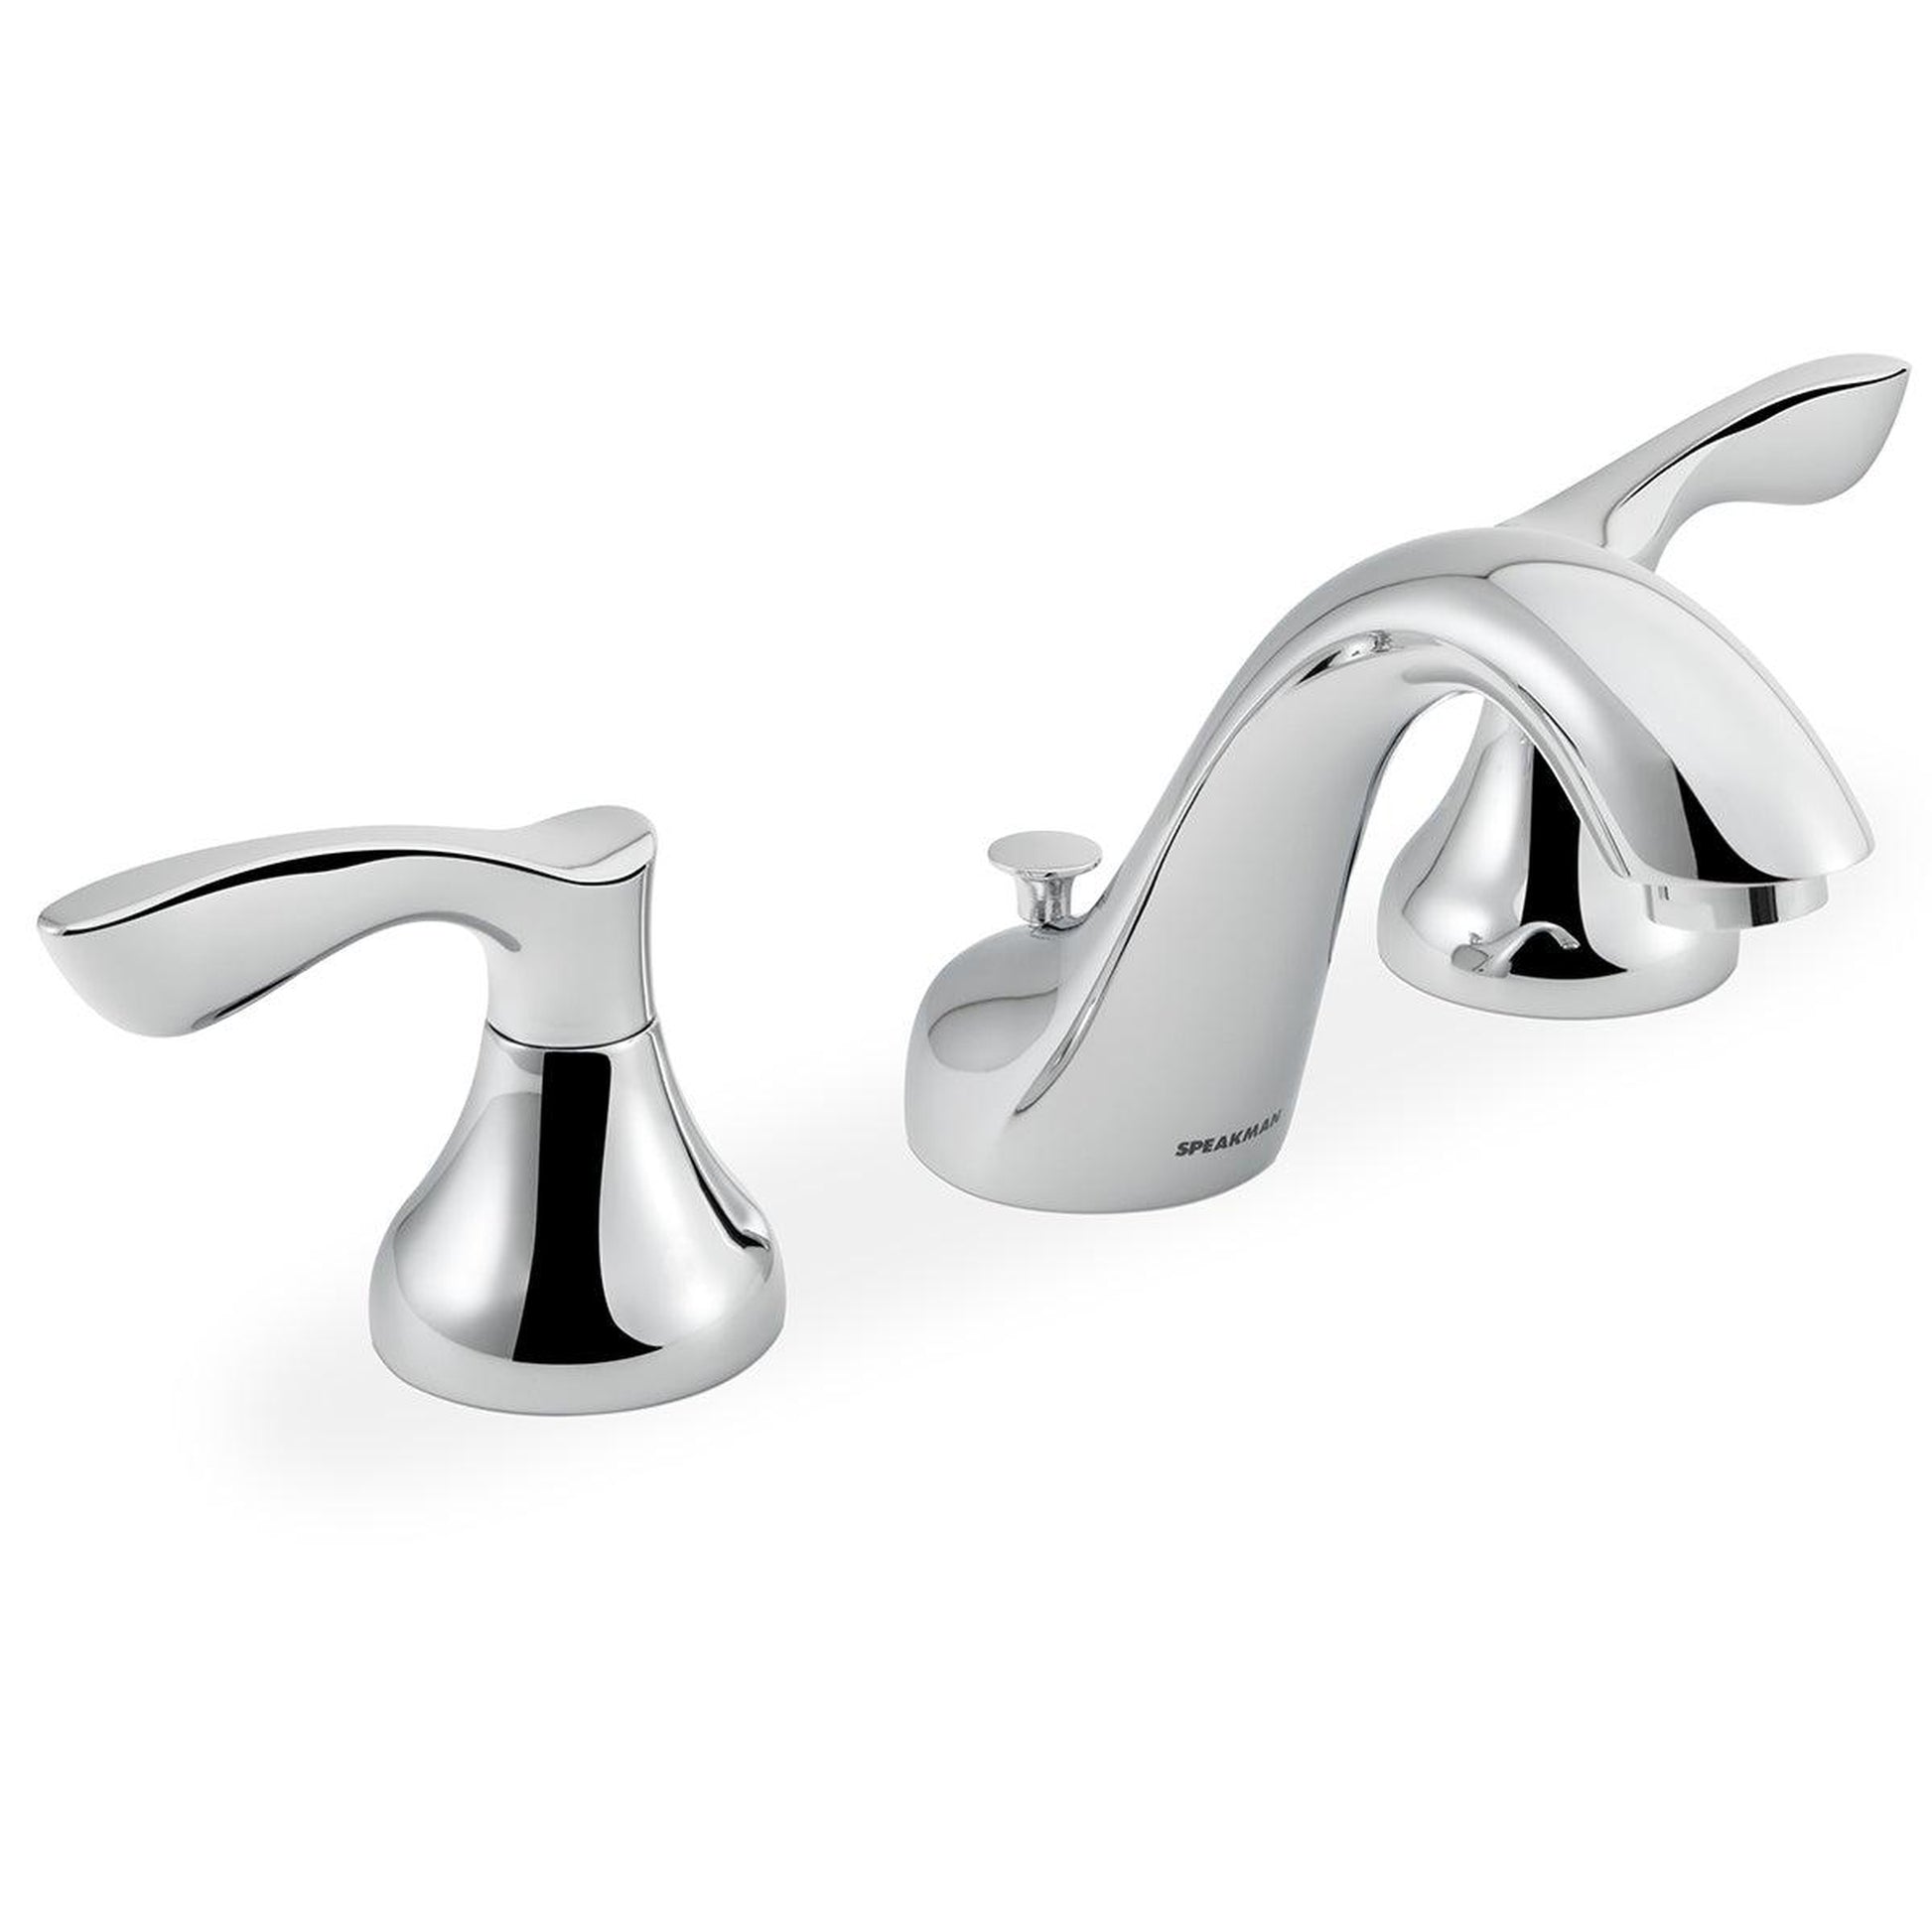 Speakman Chelsea Dual Lever Handle Widespread Faucet in Polished Chrome Finish